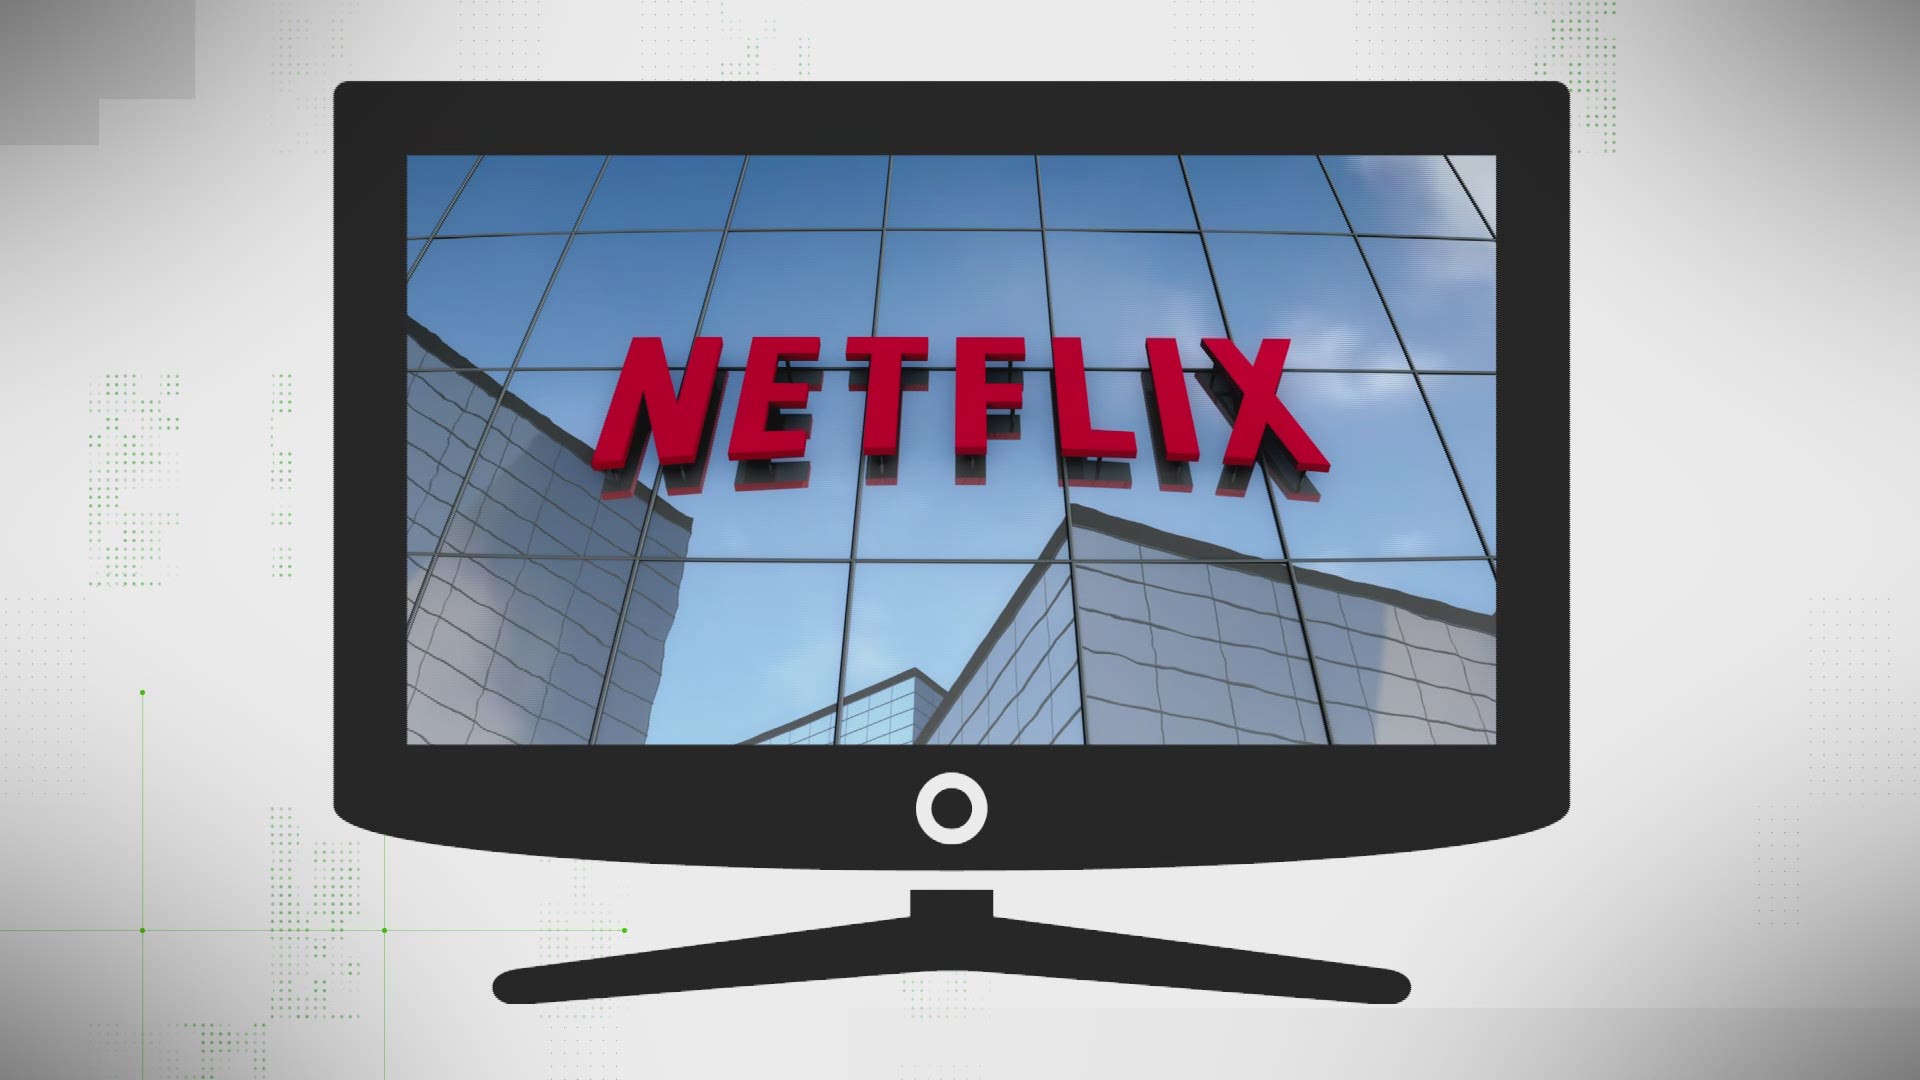 Netflix earned record profits in 2018 of nearly 900 million dollars. But some article and headlines claim the streaming company didn't pay any taxes on their earnings.